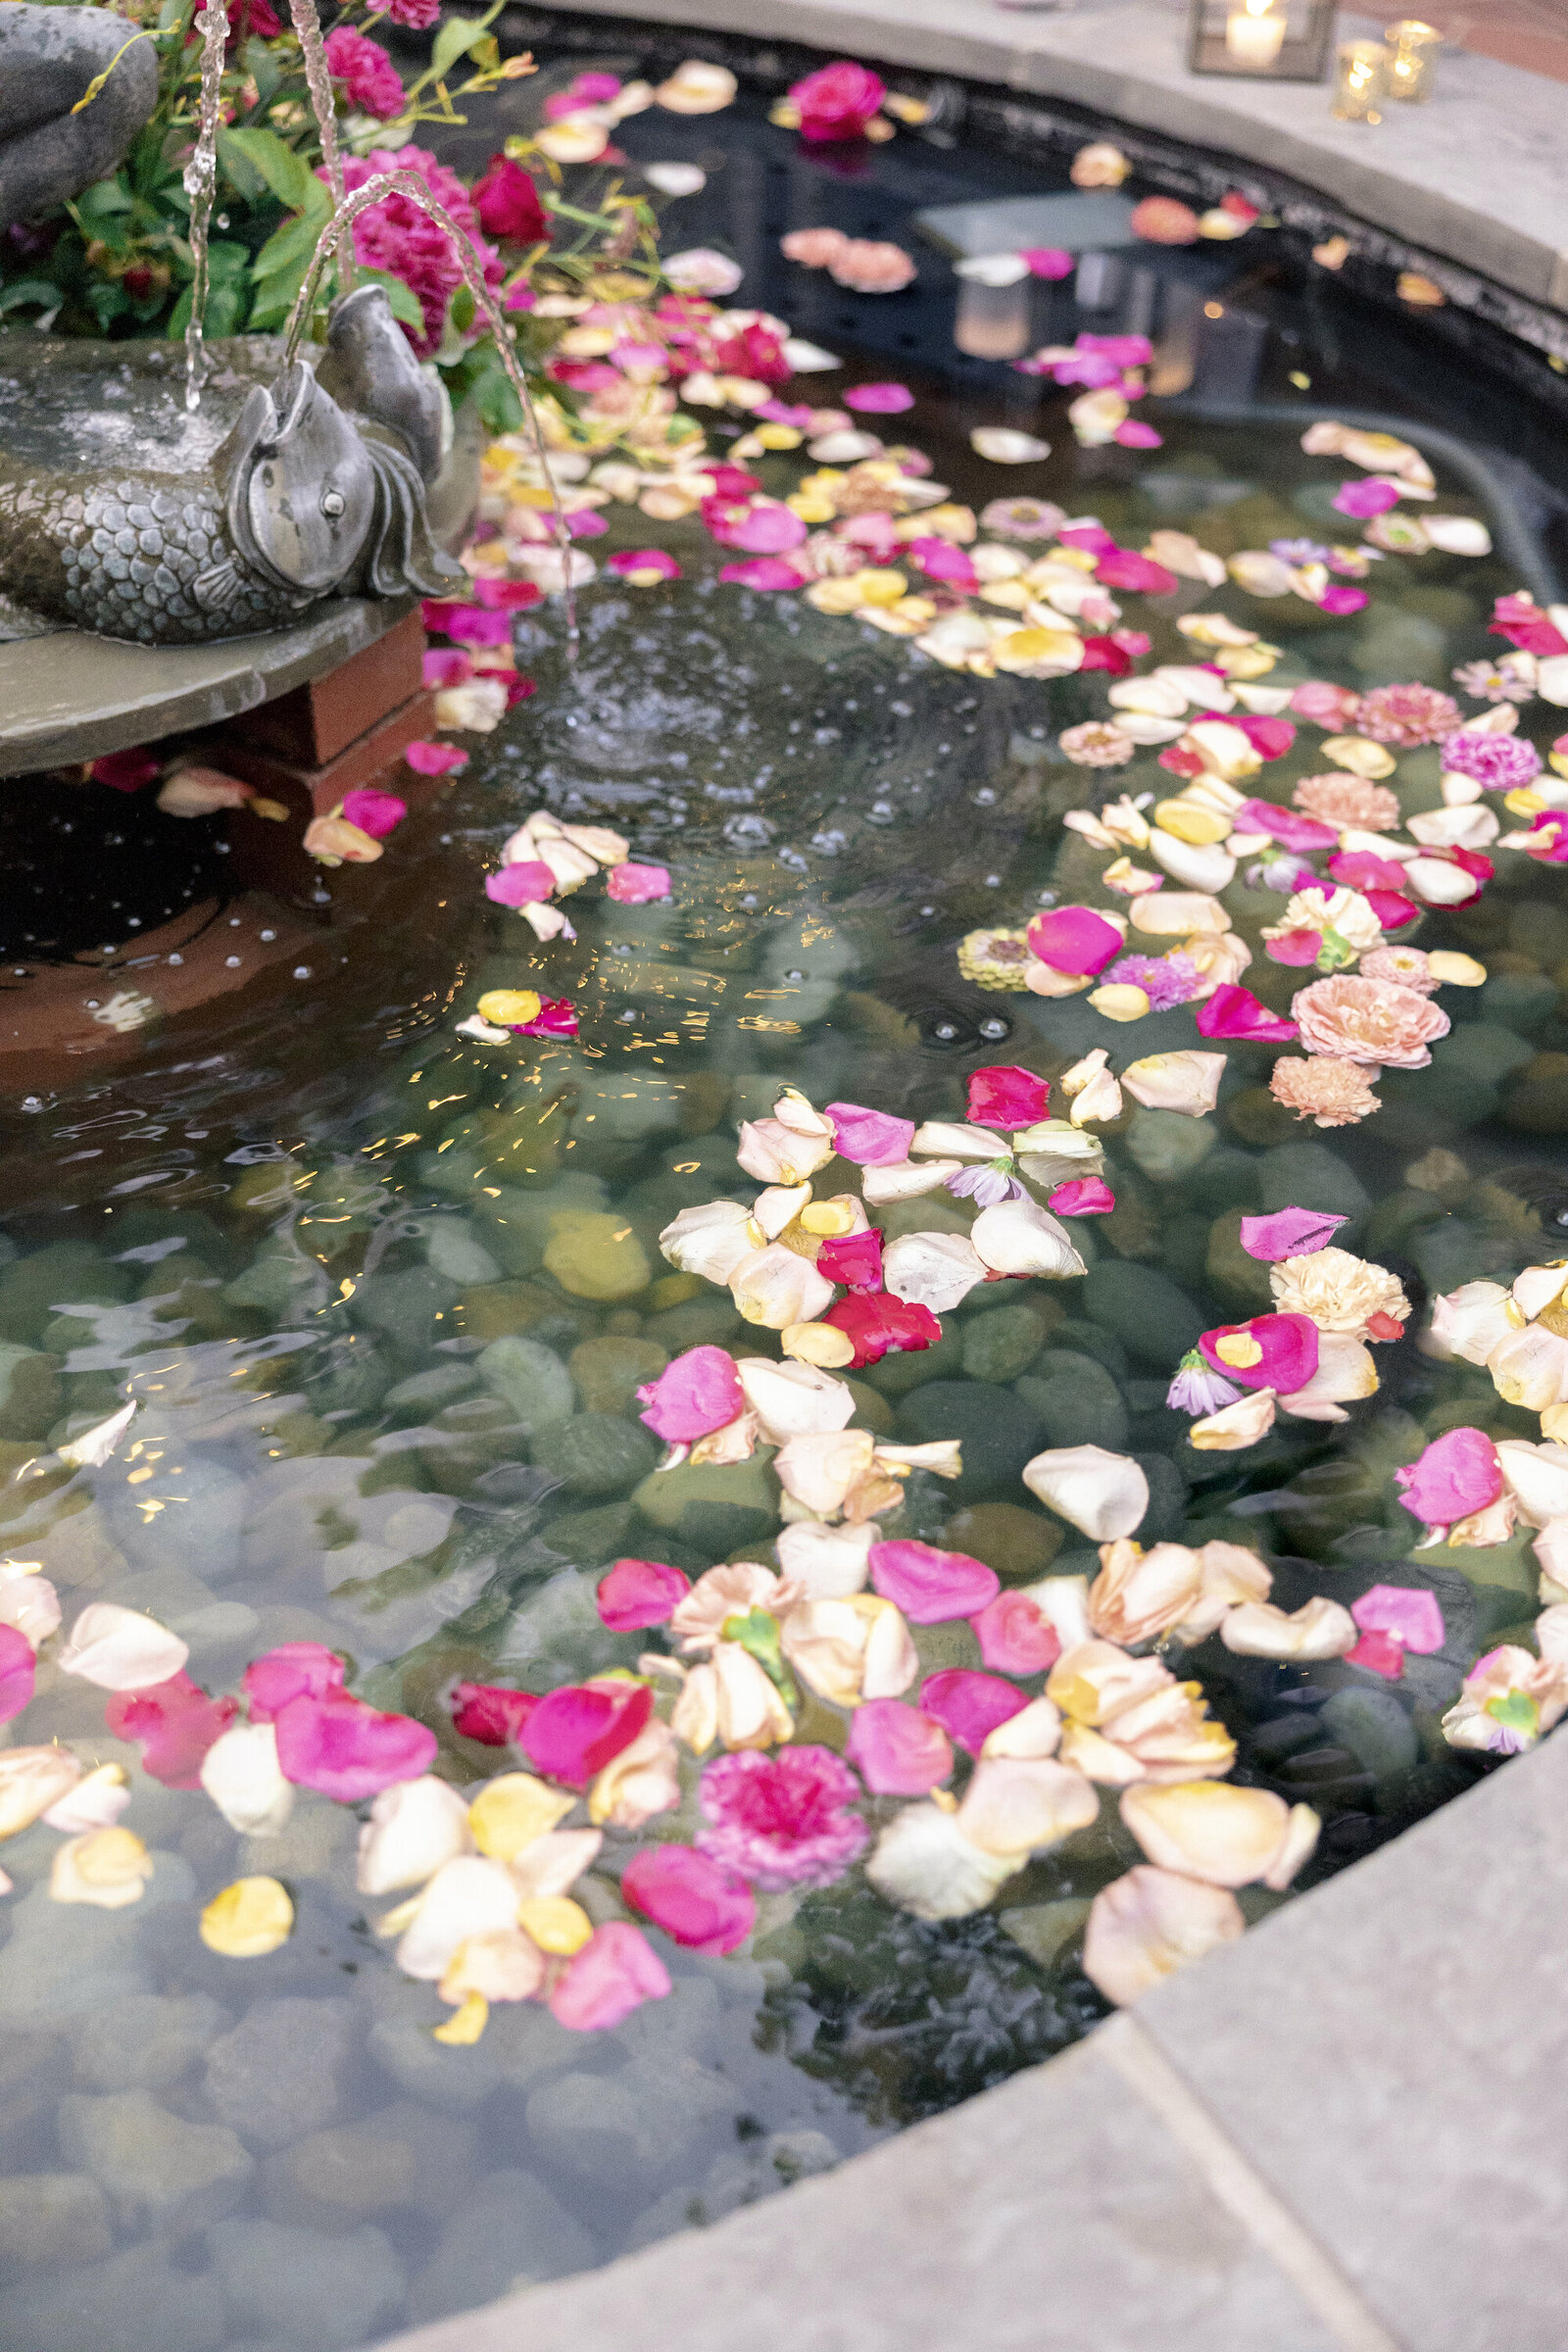 Rose petals floating in the water of a water fountain.